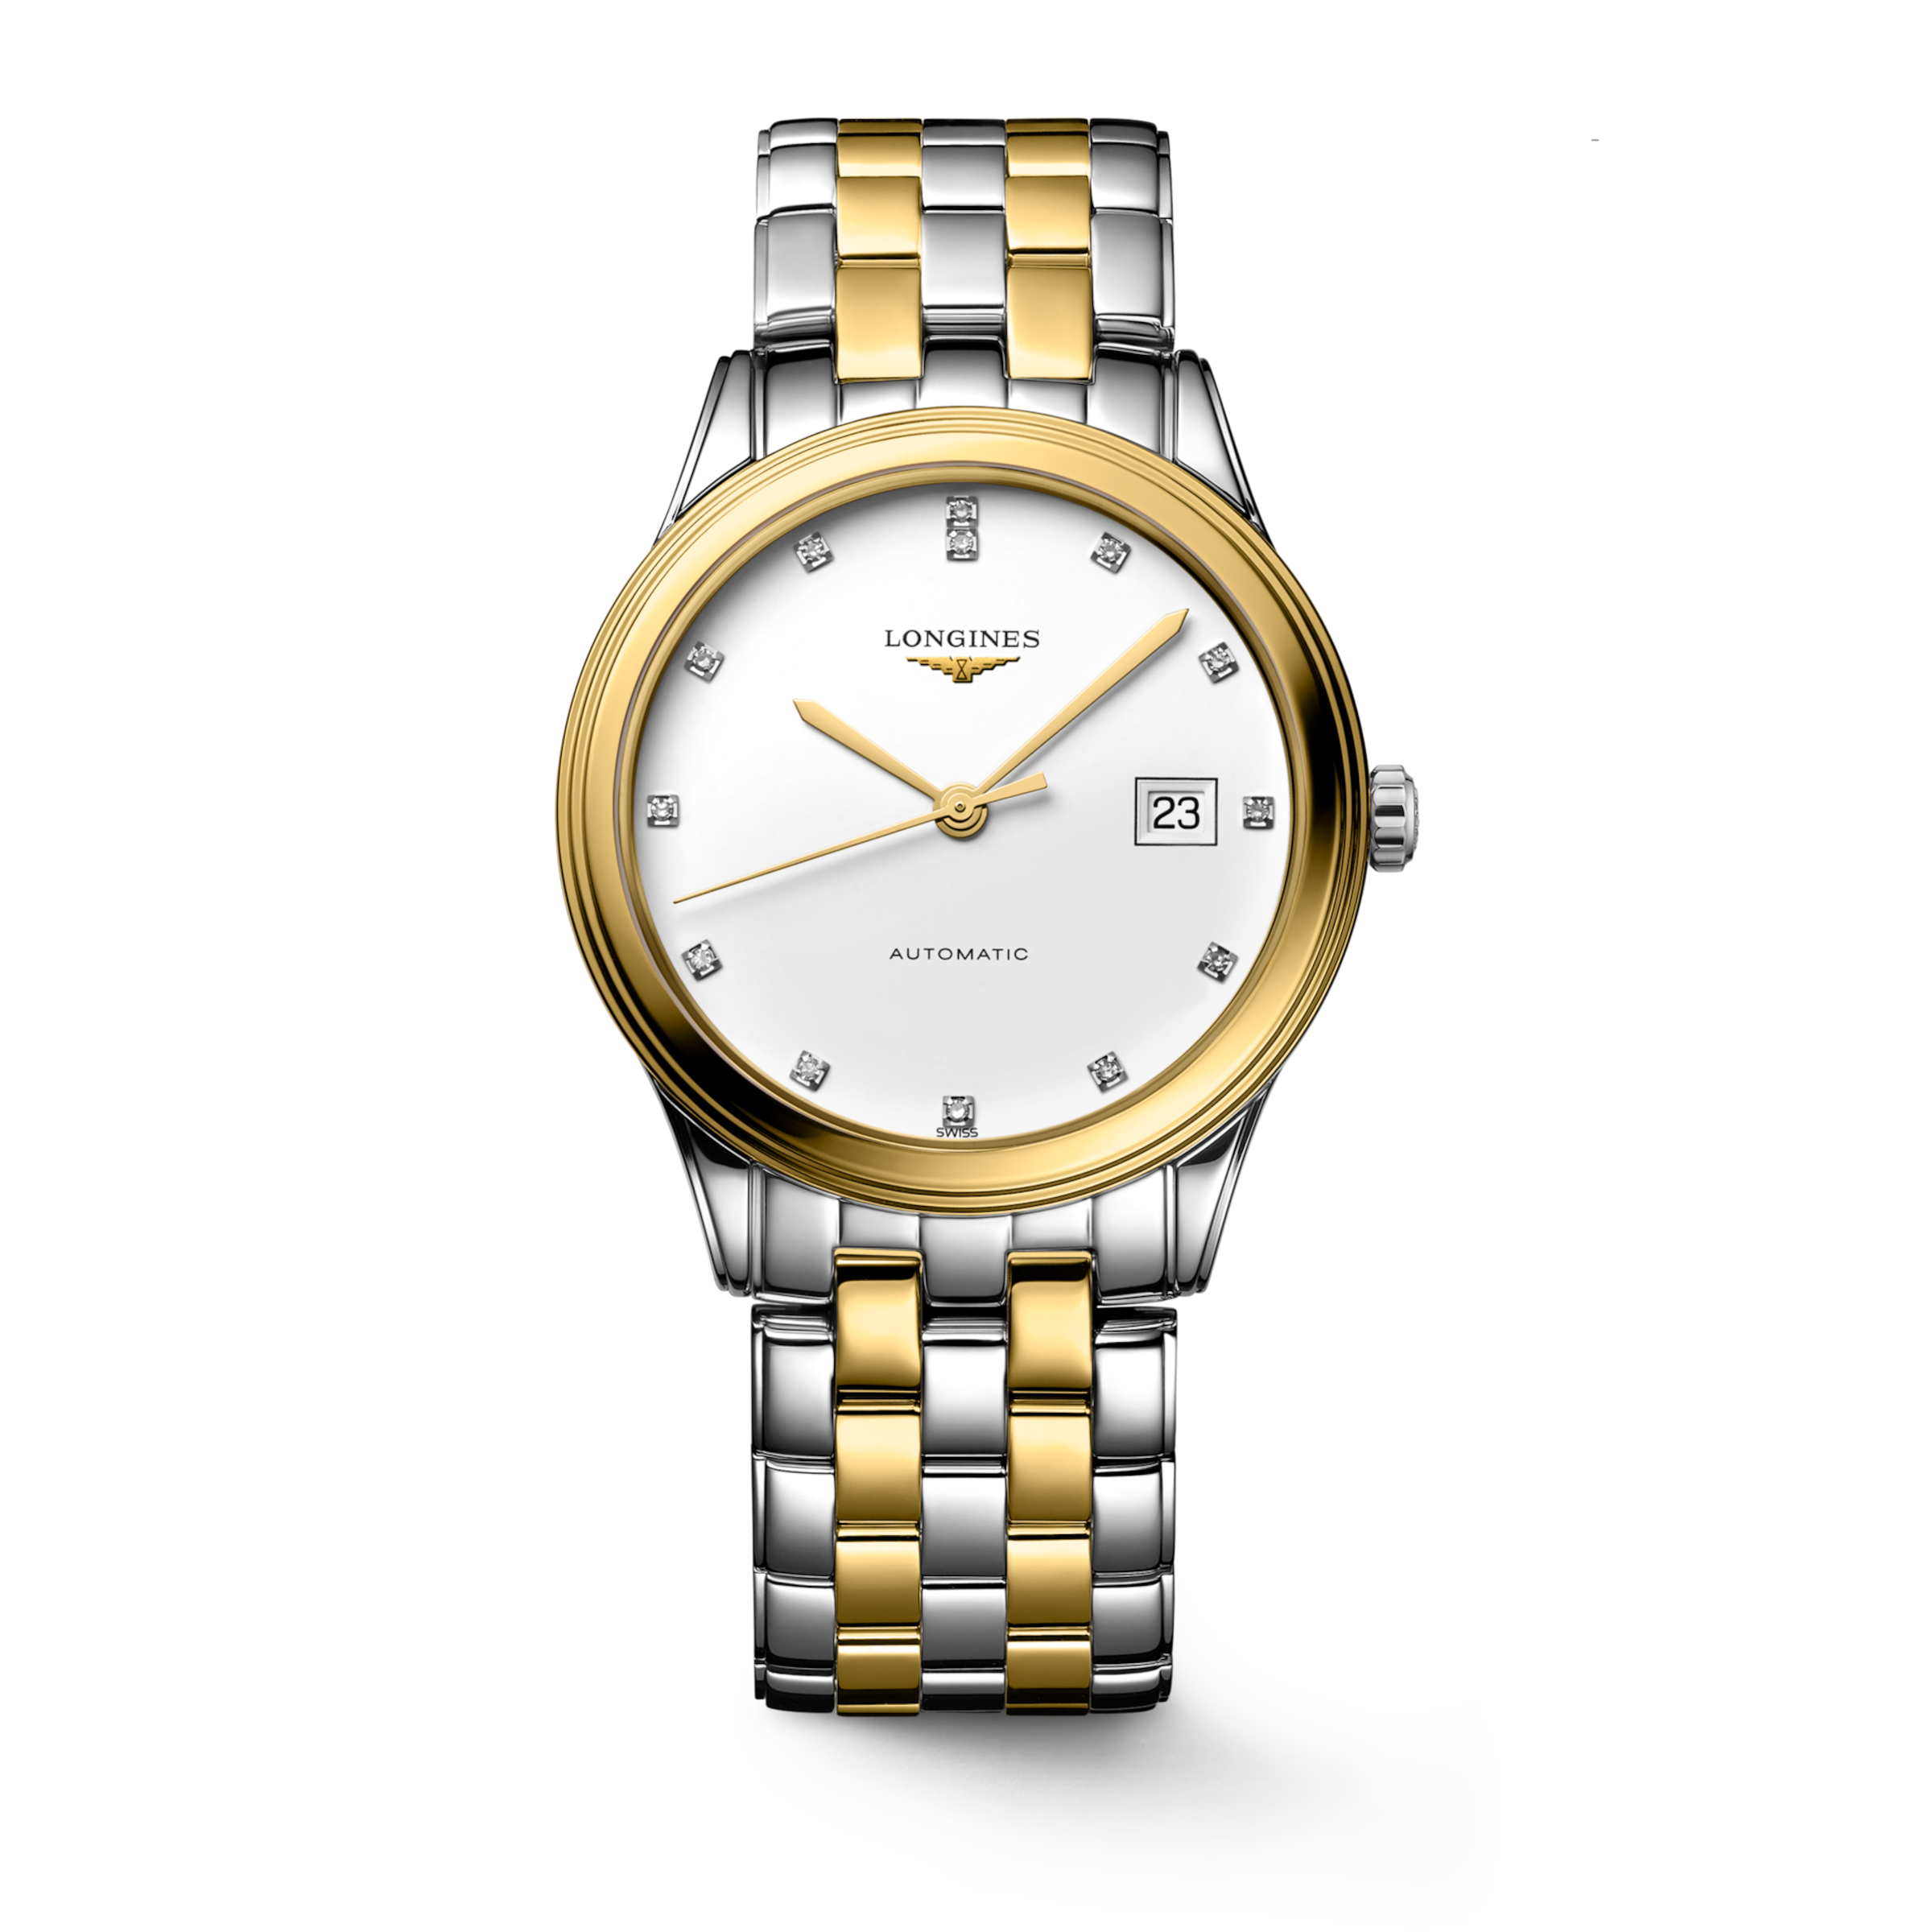 Longines FLAGSHIP Automatic Stainless steel and yellow PVD coating Watch - L4.974.3.27.7